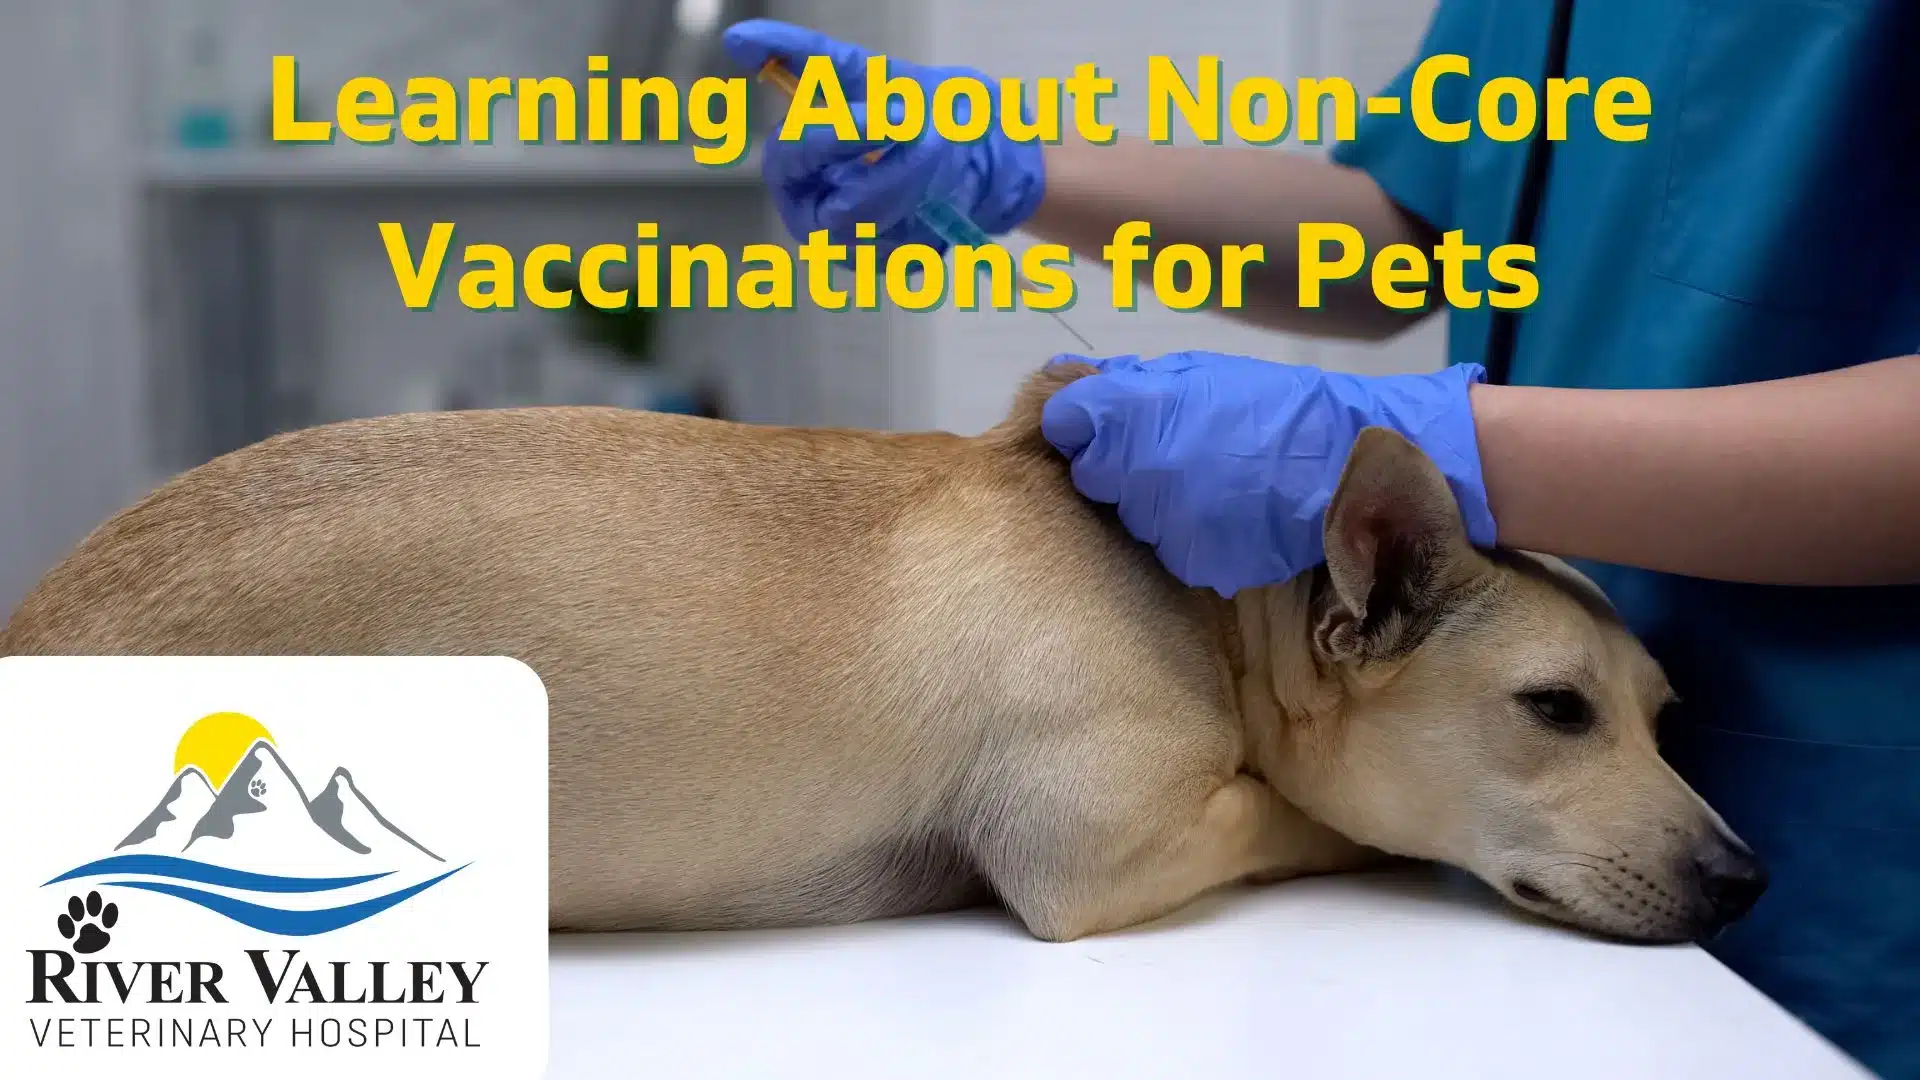 Learning About Non-Core Vaccinations for Pets